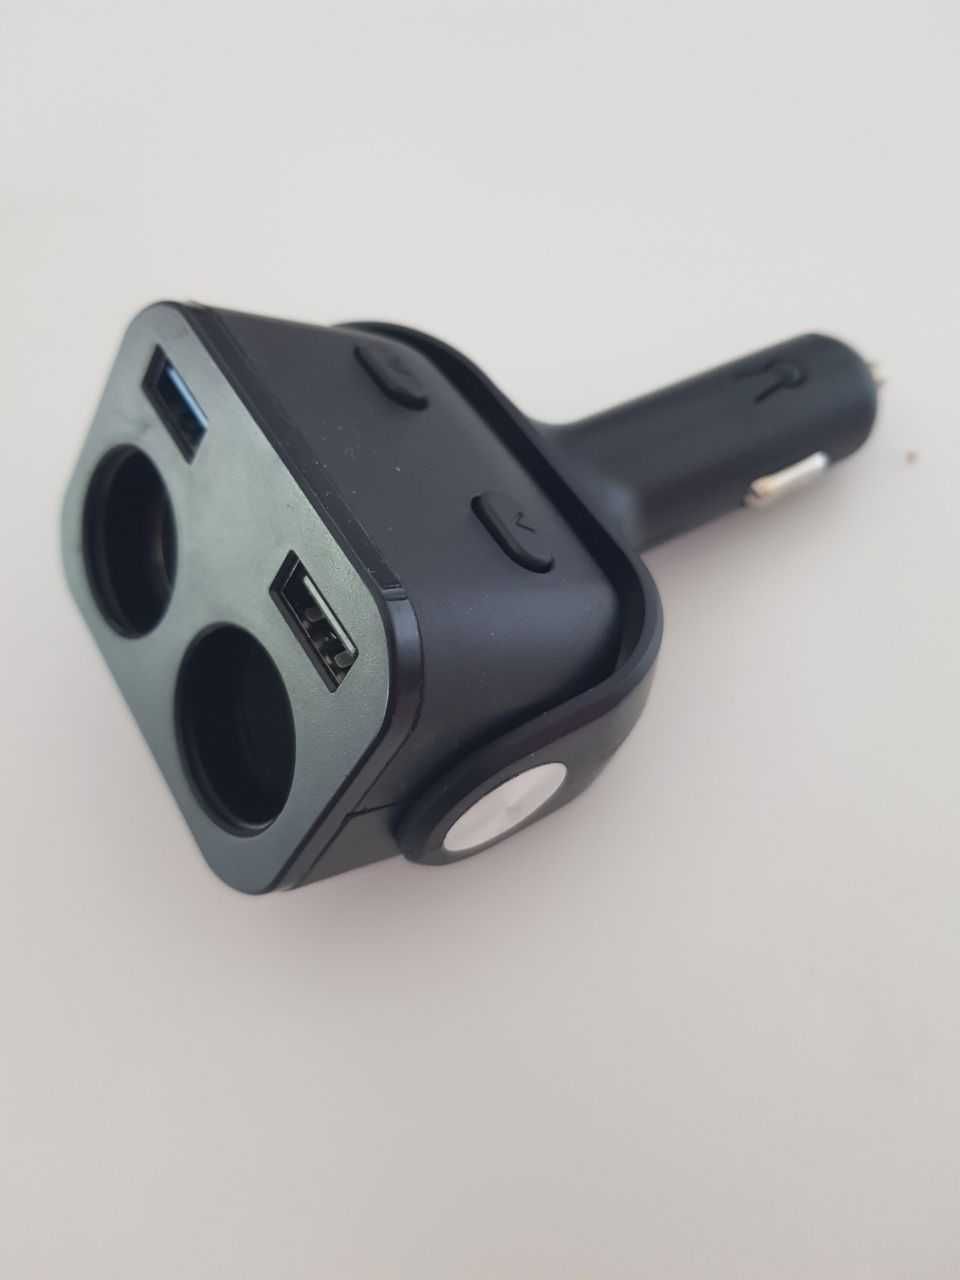 Car Charger Socket Splitter Adapter With 2 Usb